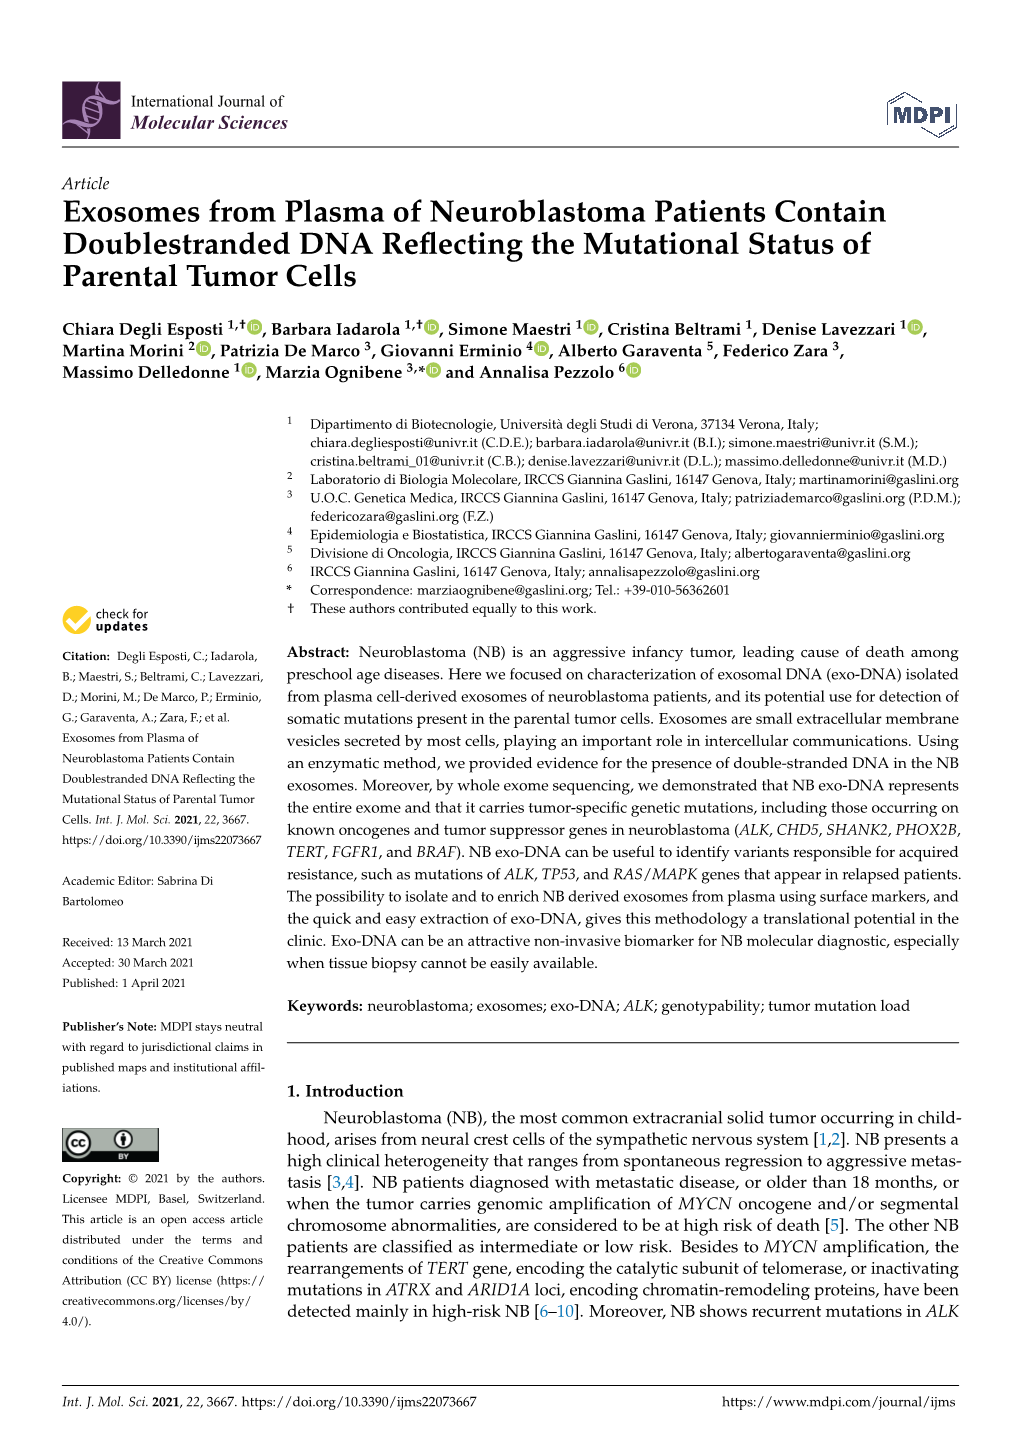 Exosomes from Plasma of Neuroblastoma Patients Contain Doublestranded DNA Reﬂecting the Mutational Status of Parental Tumor Cells